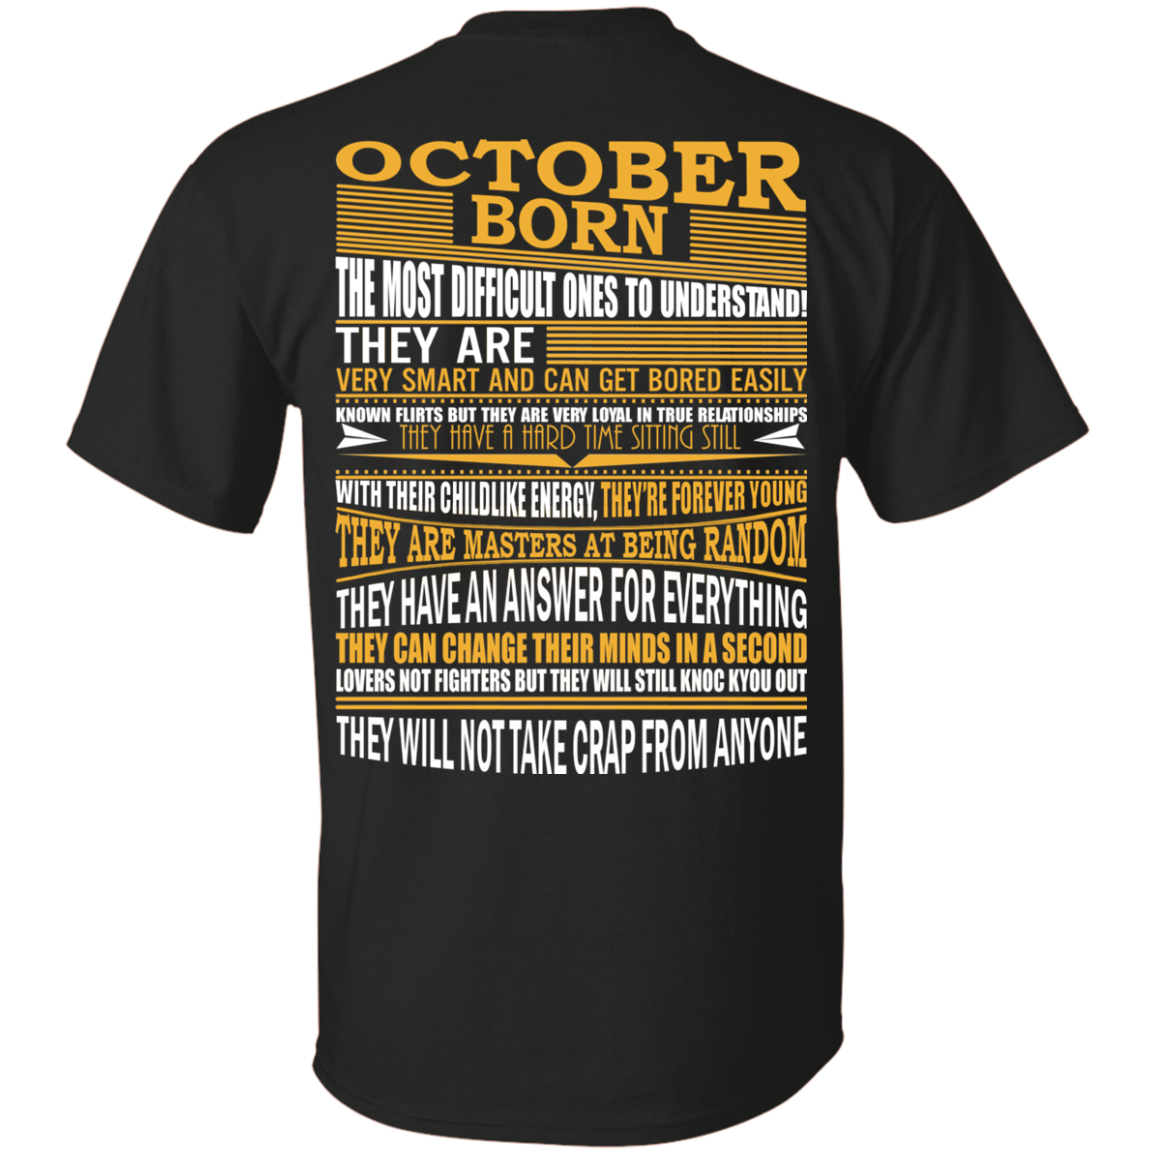 October Born - The Most Difficult Ones To Understand Shirt - Back Design